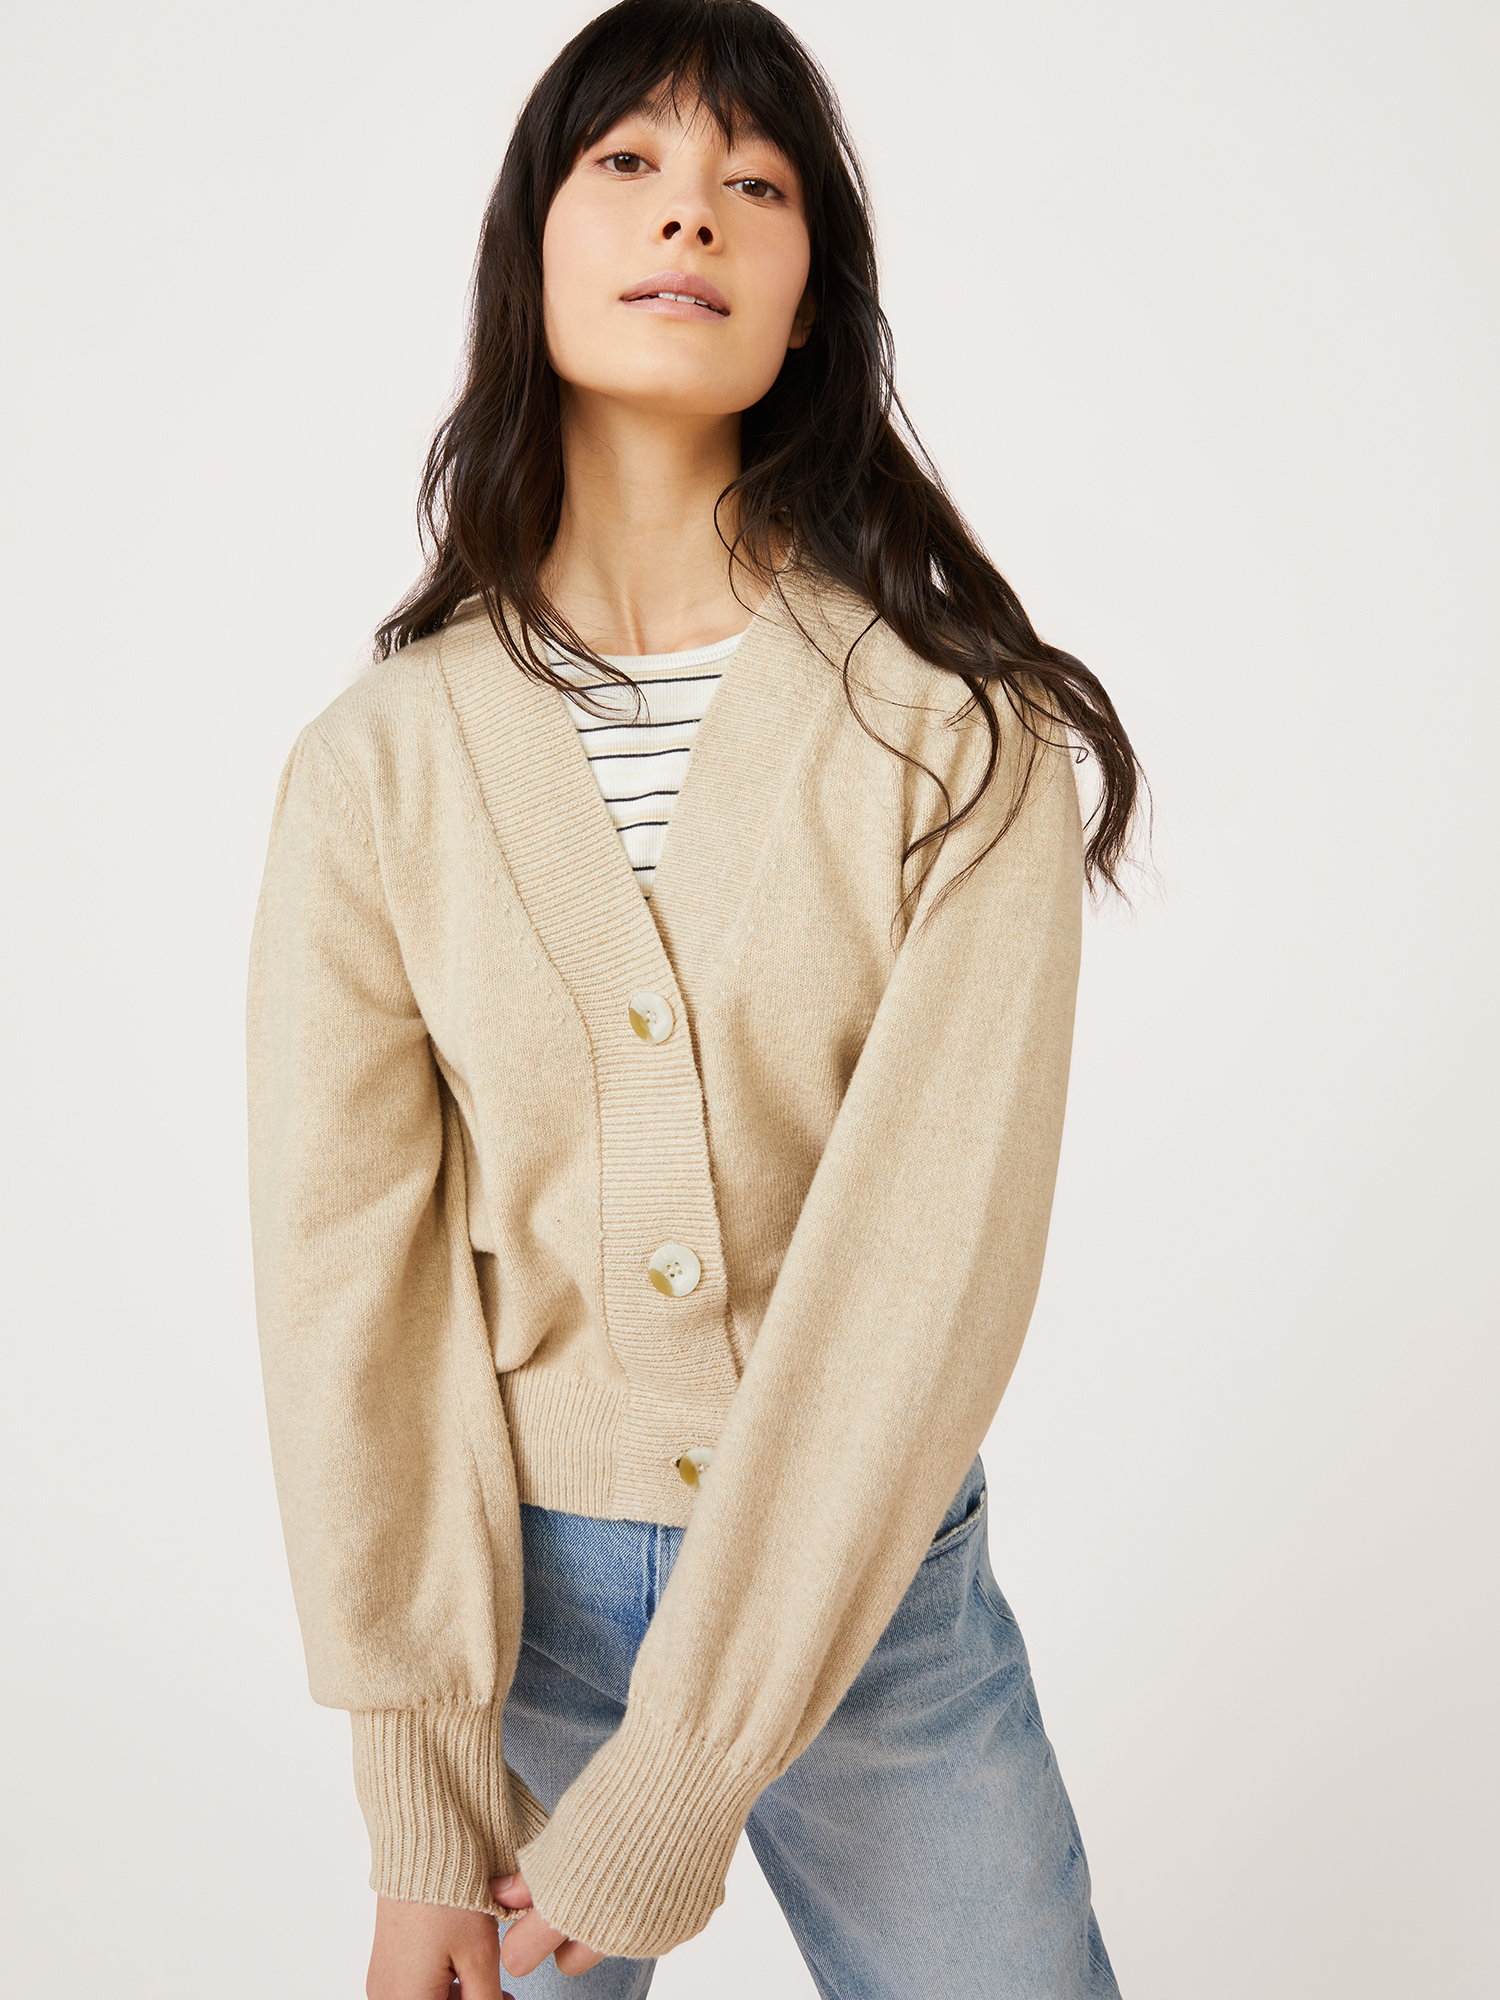 Free Assembly Women’s Puff Sleeve Cardigan - image 1 of 7